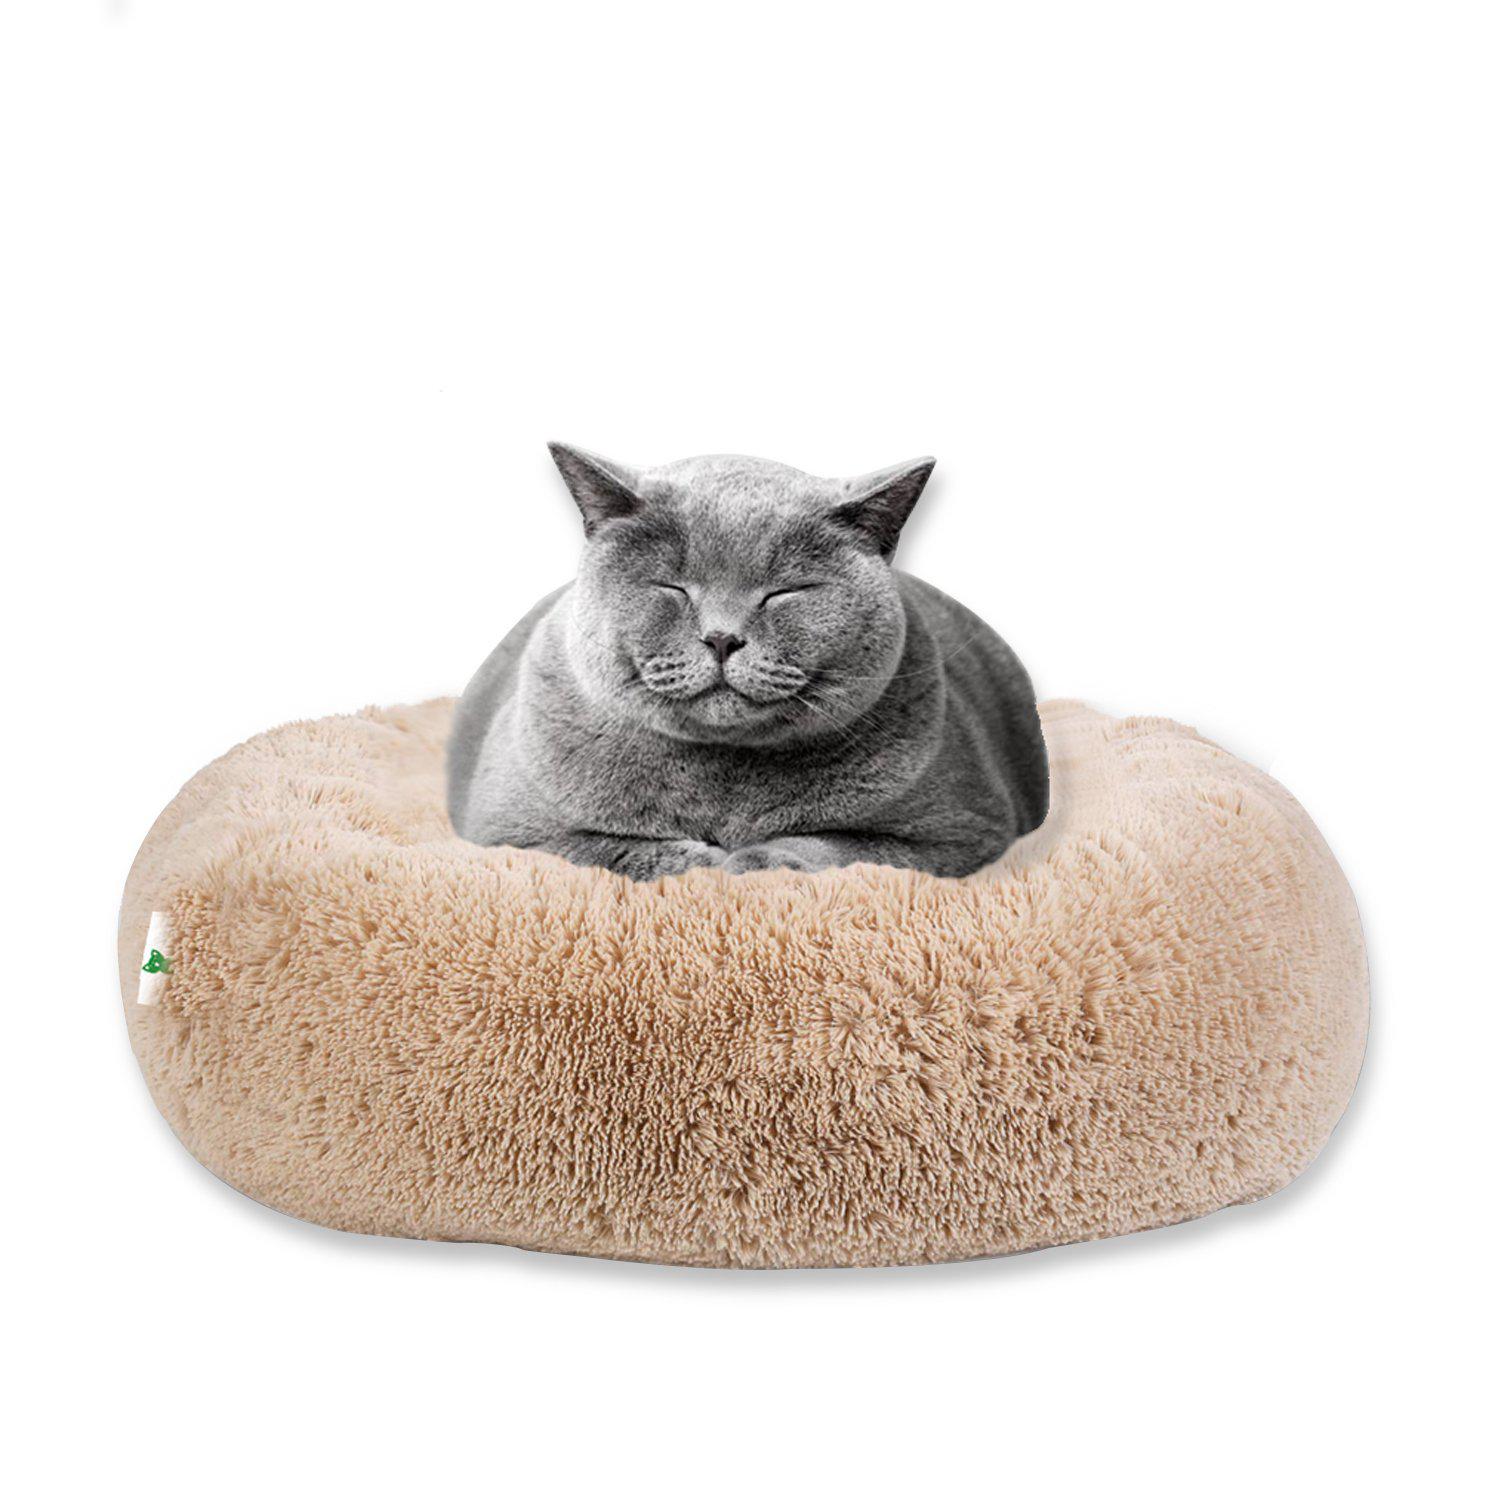 COUSSIN POUR CHATS SOFTY™ – CATSIMO